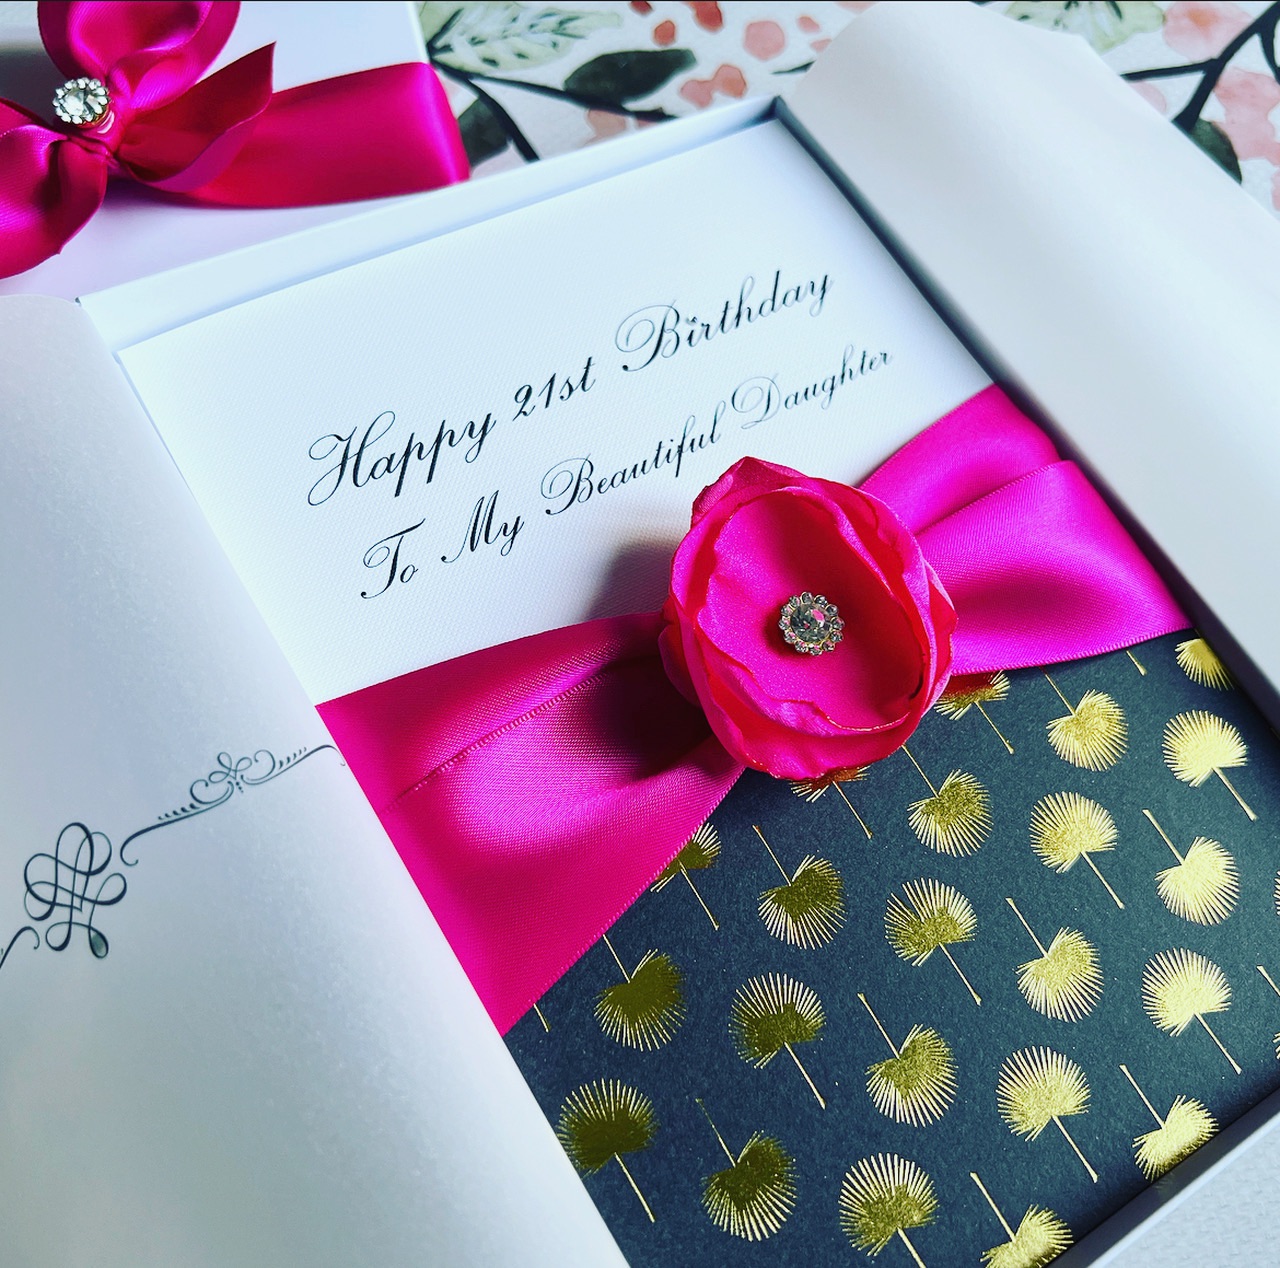 21st Birthday cards luxury boxed gift